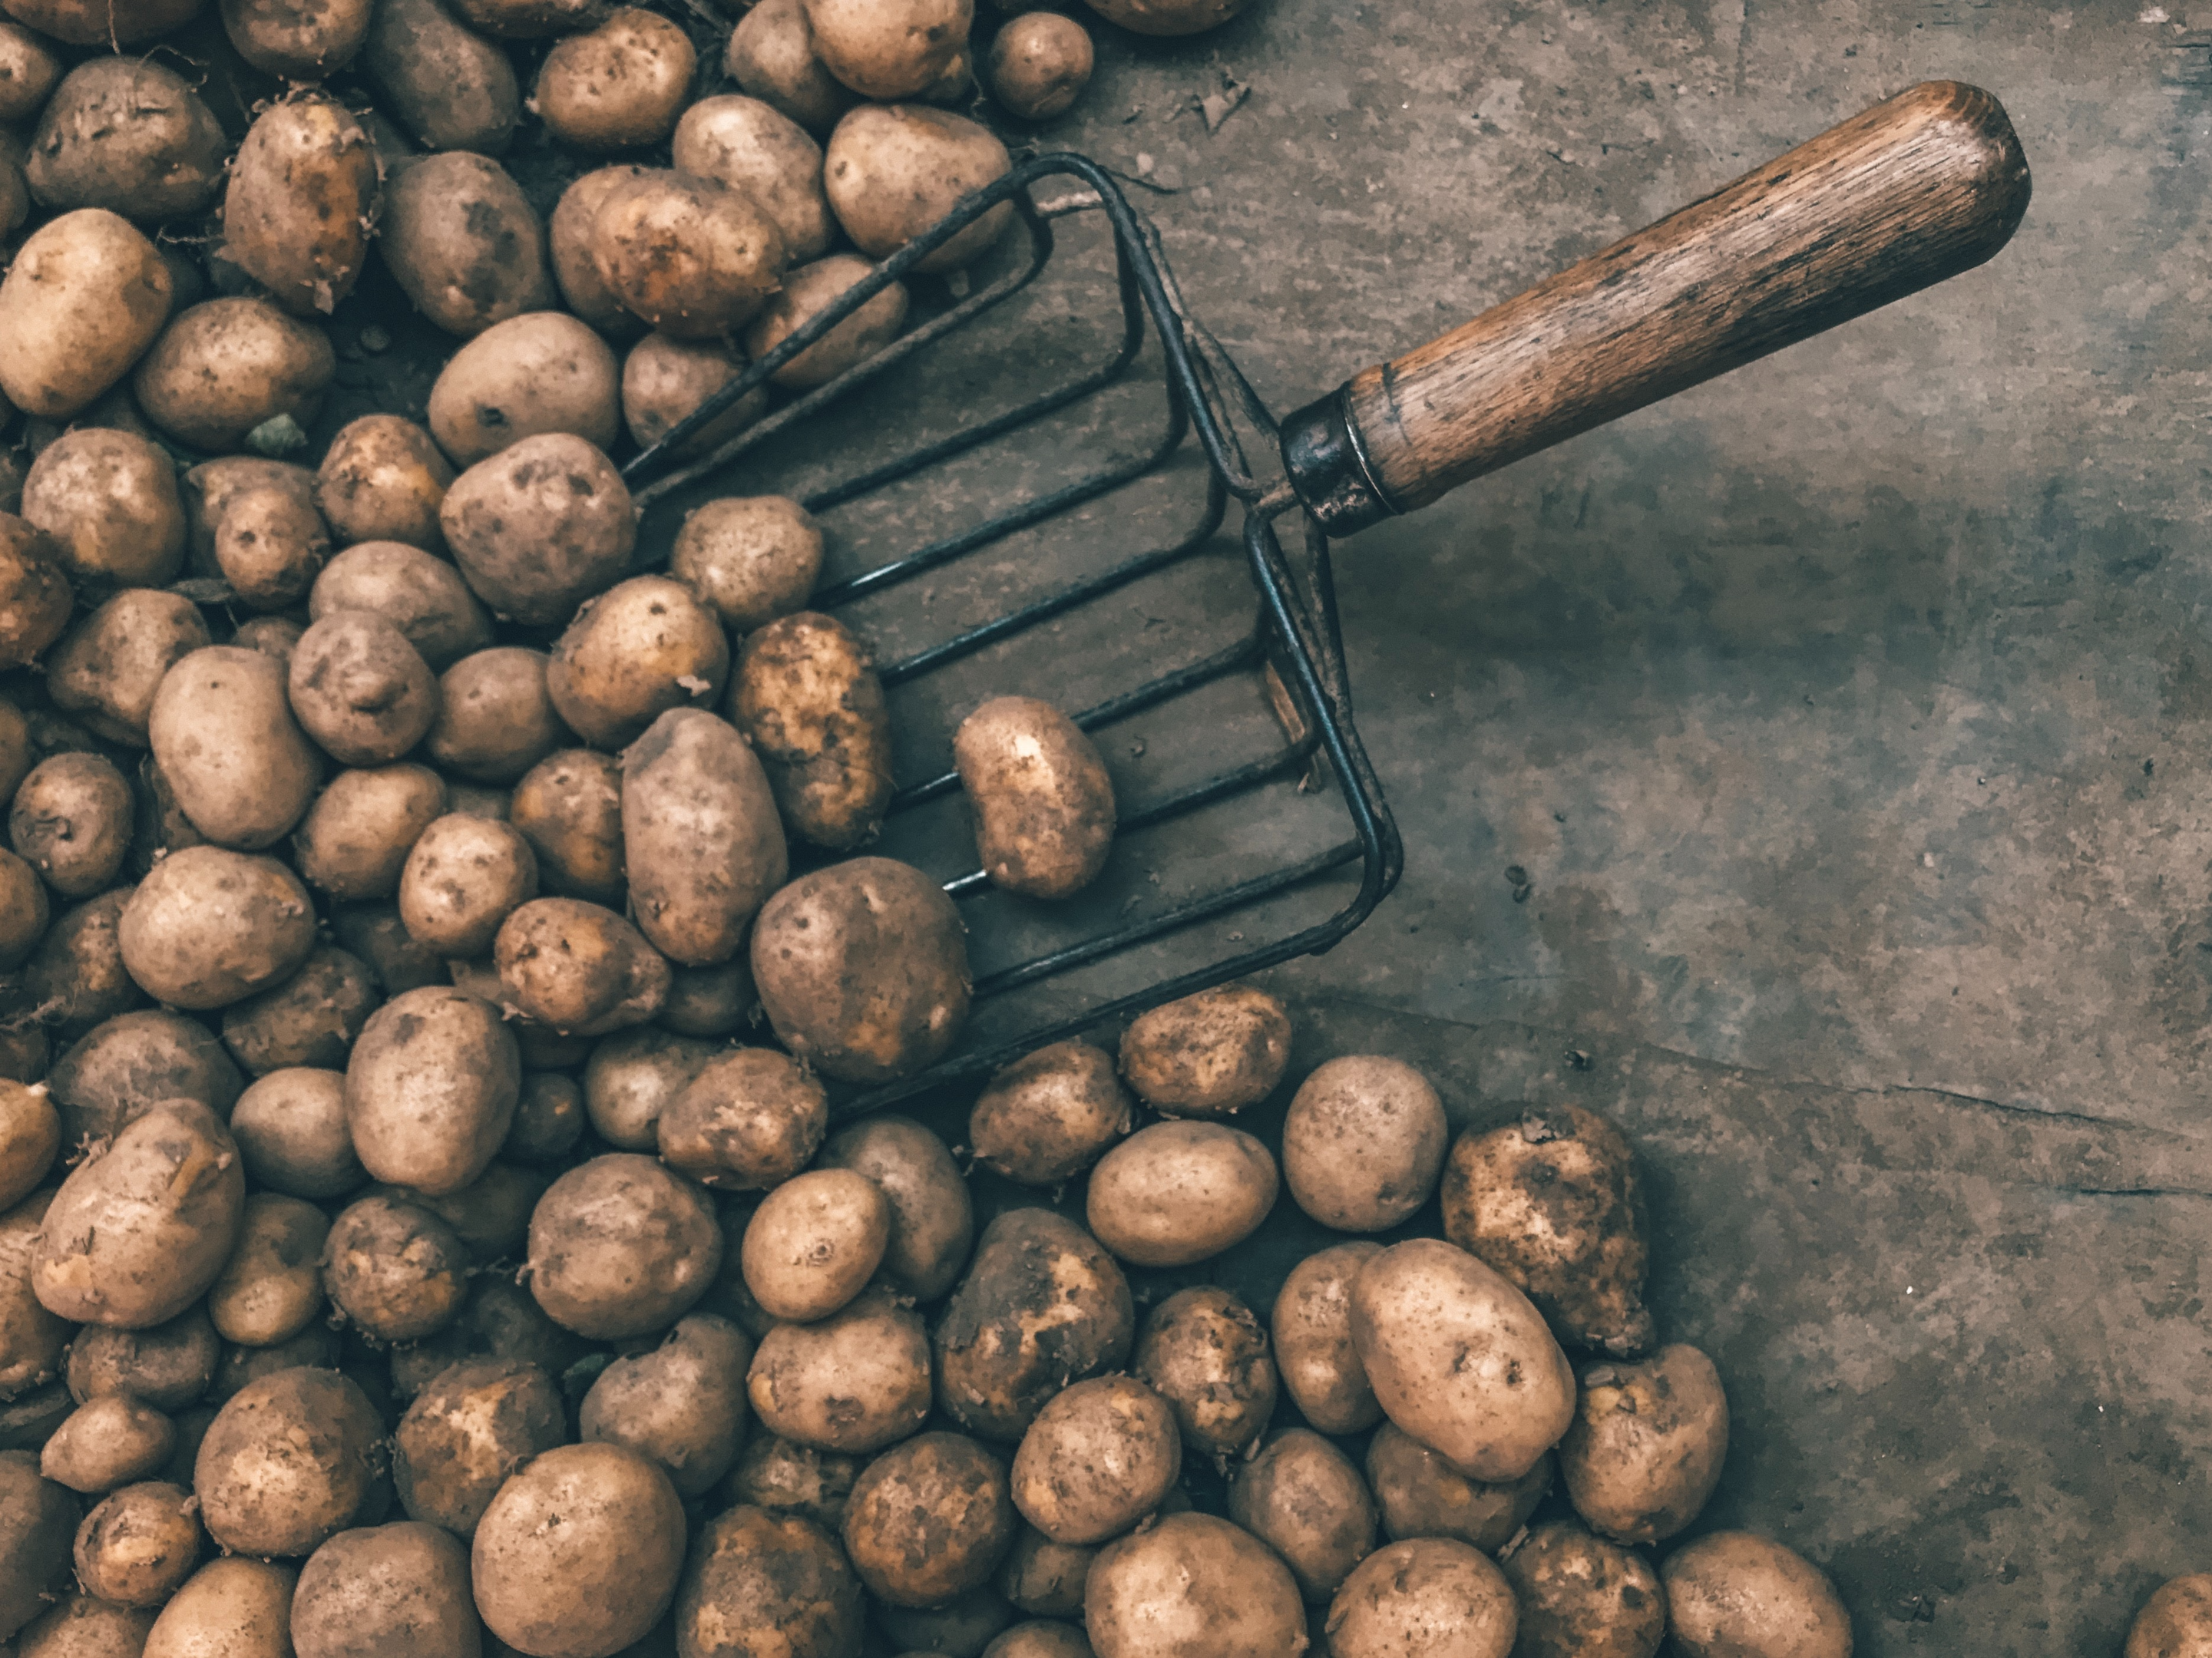 How to Tell if a Potato is Bad: Facts You Must Know About Your Staple Food 7